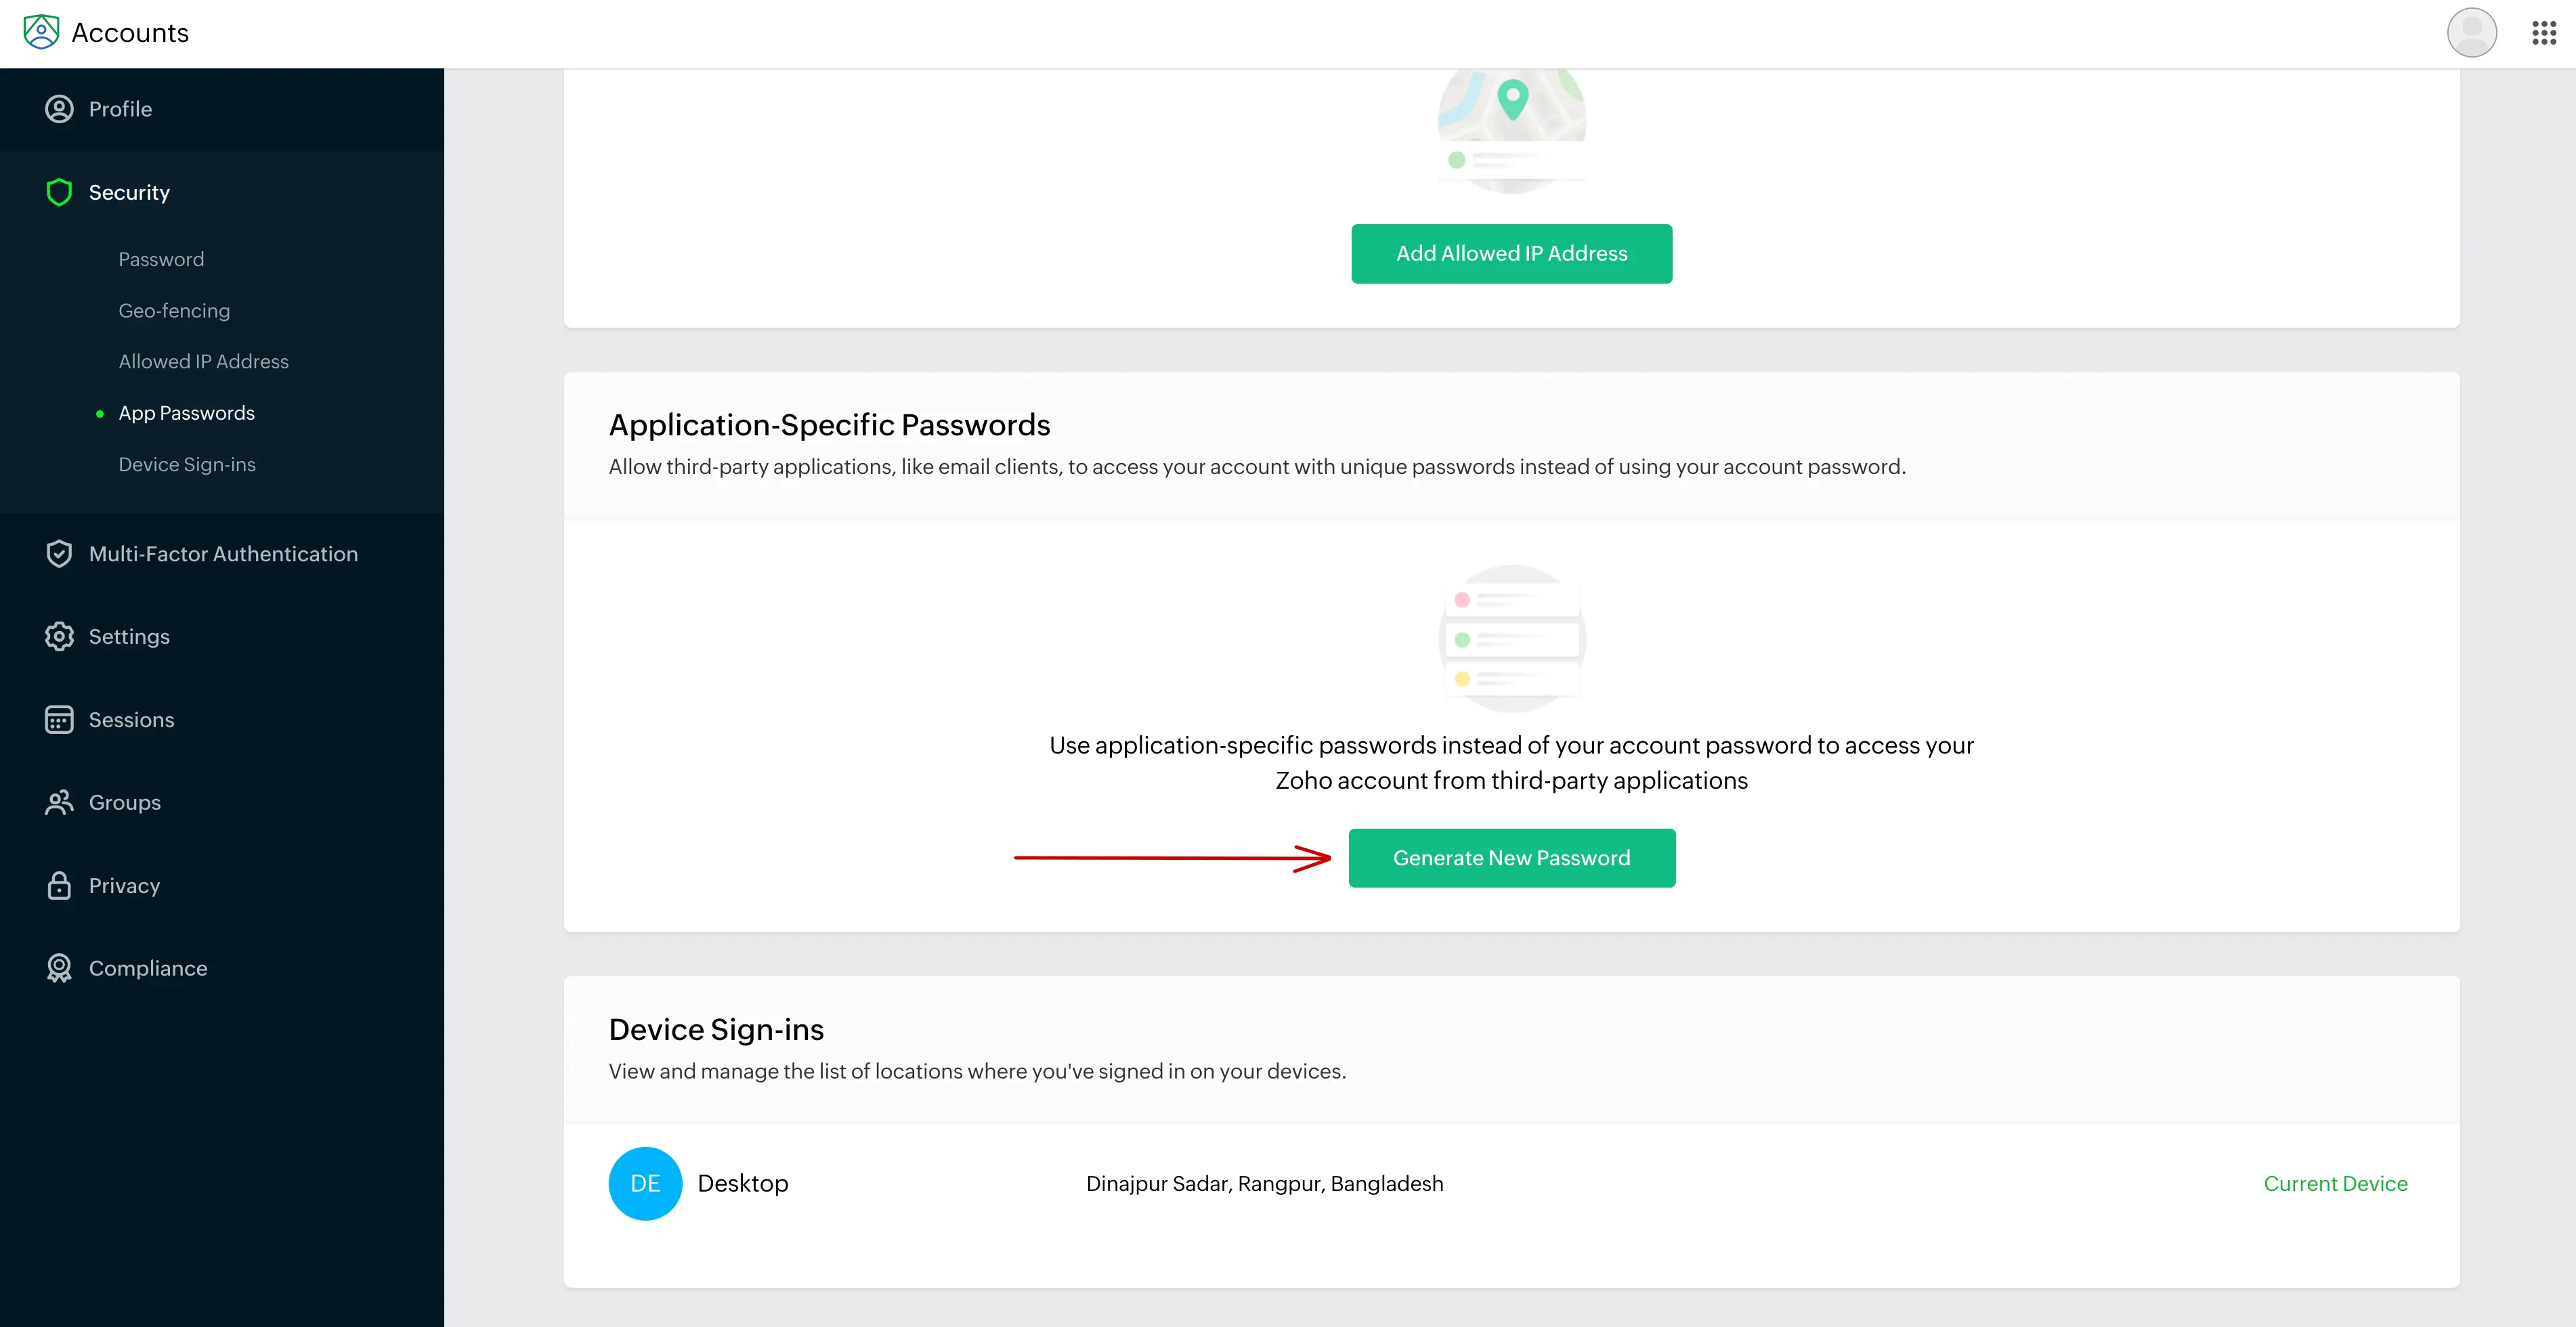 zohomail application specific password section for creating app password